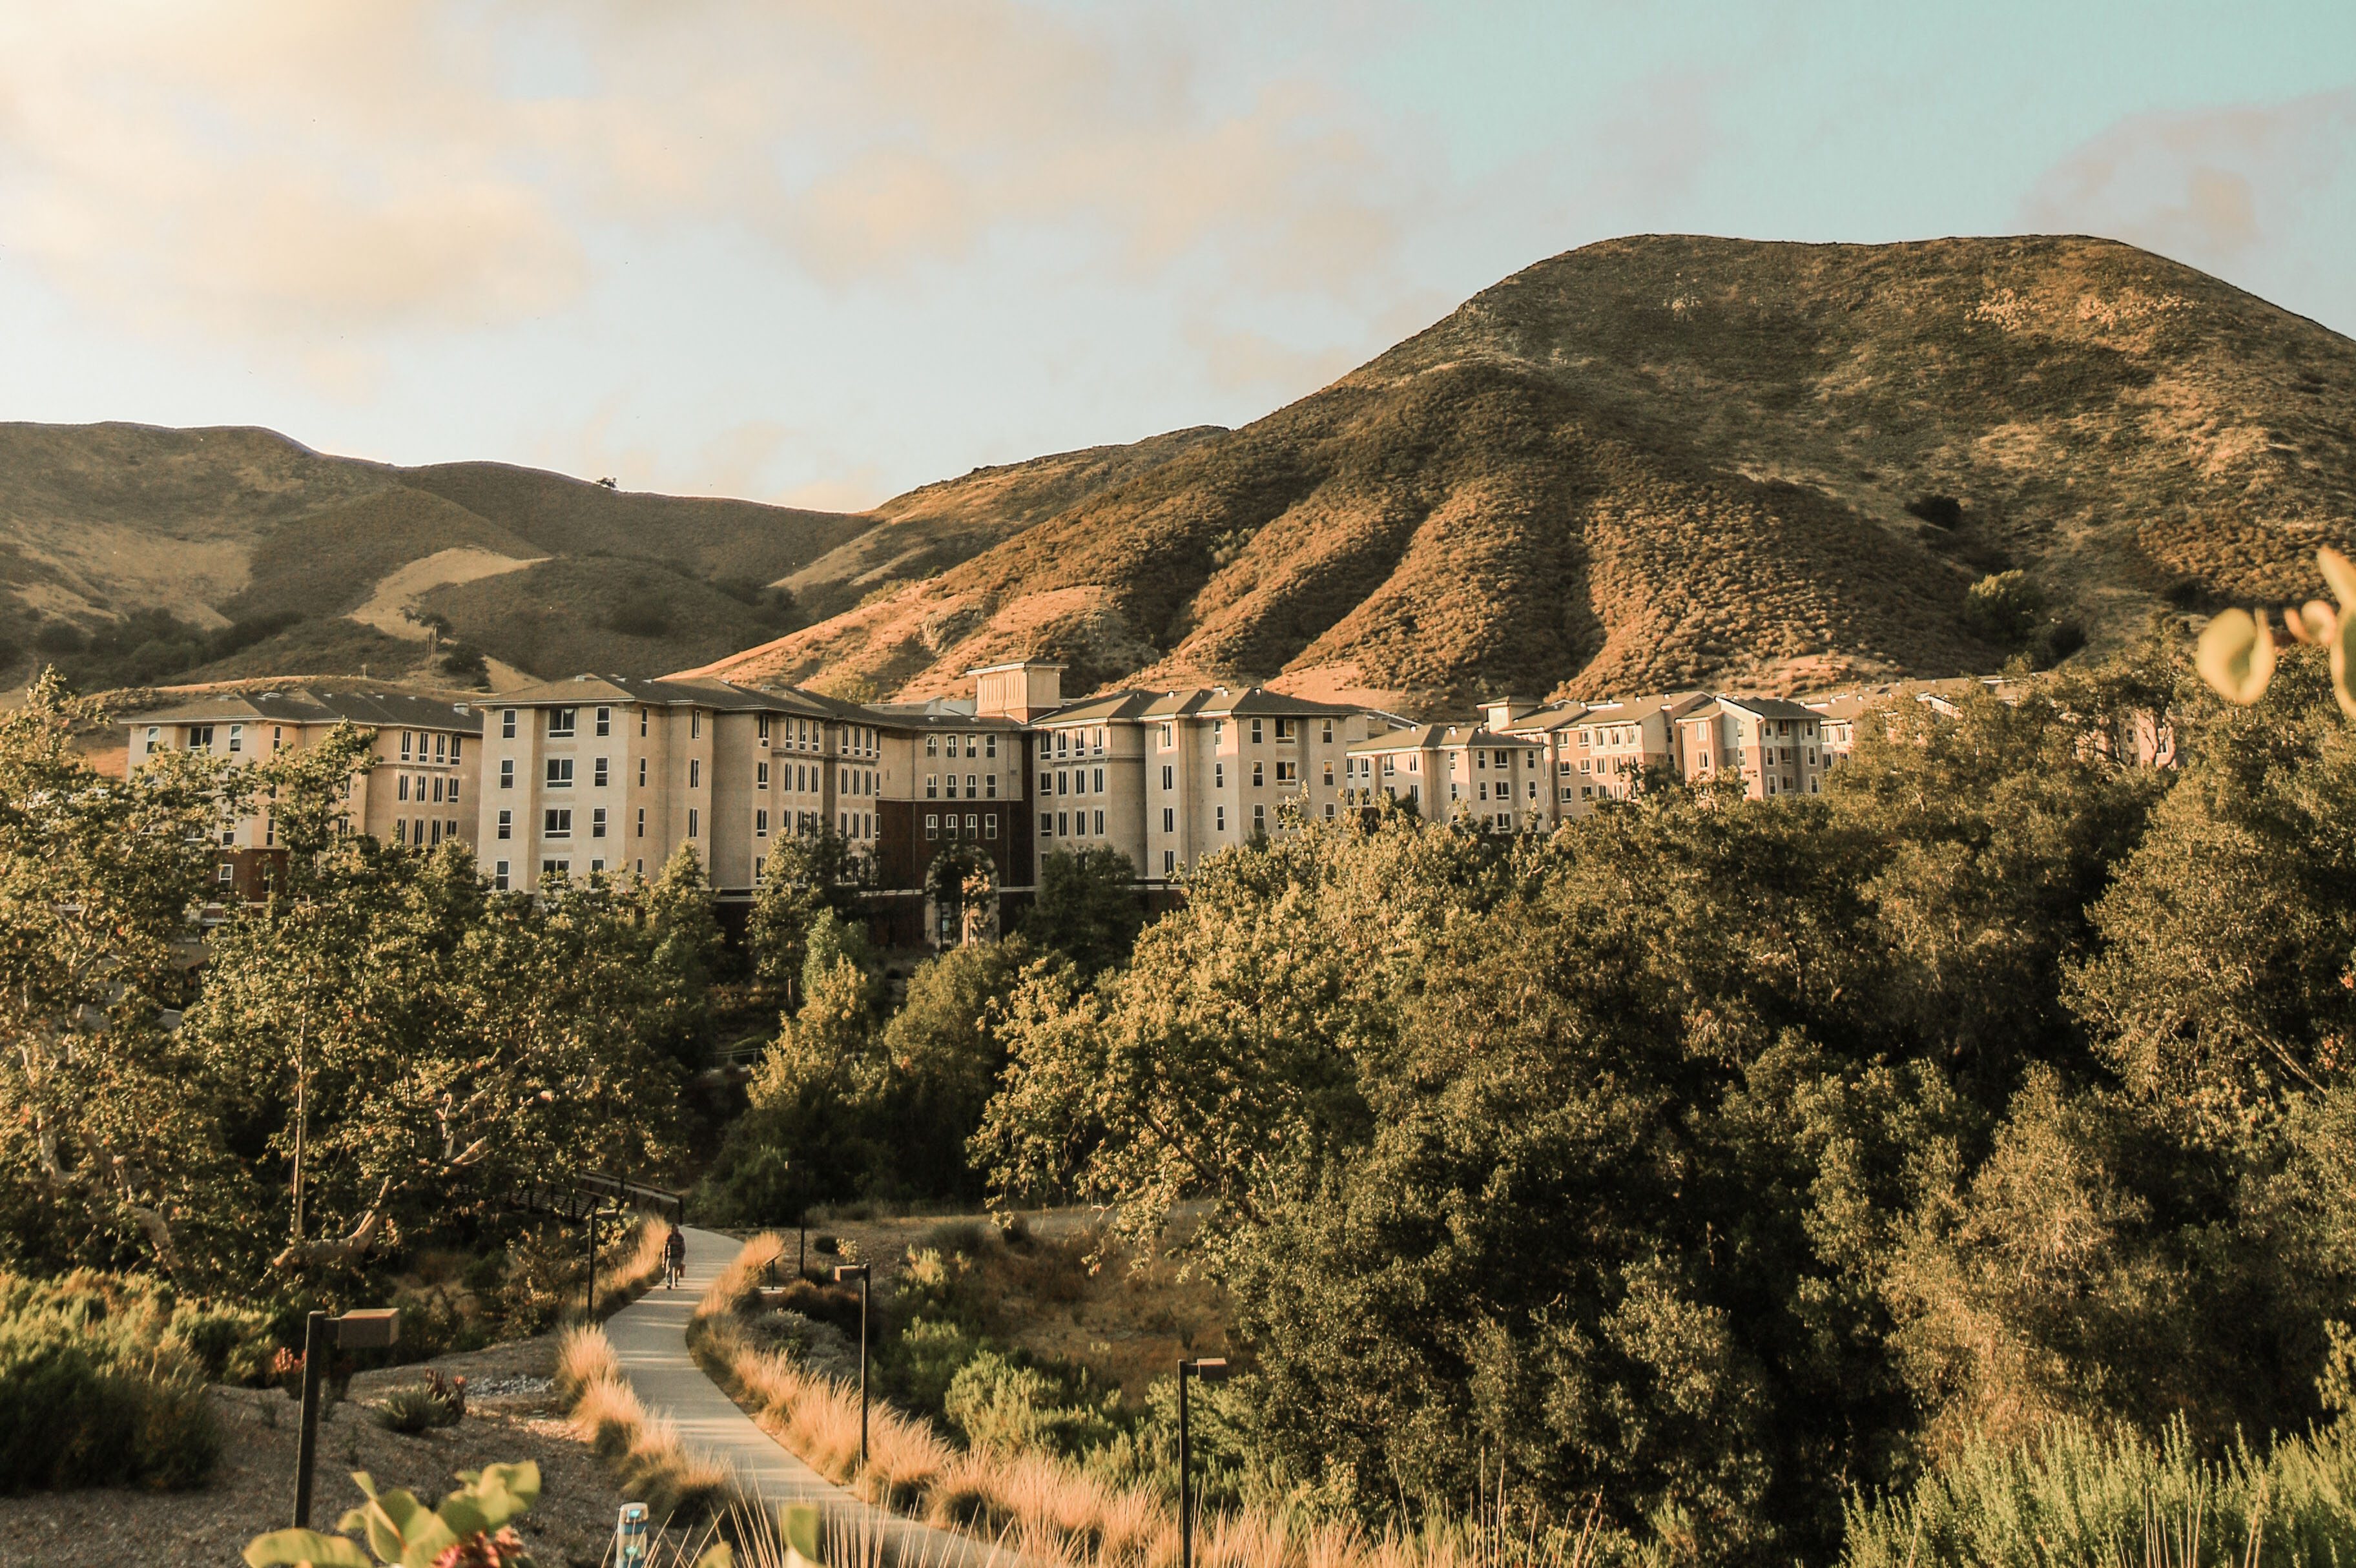 View over the Cal Poly campus.